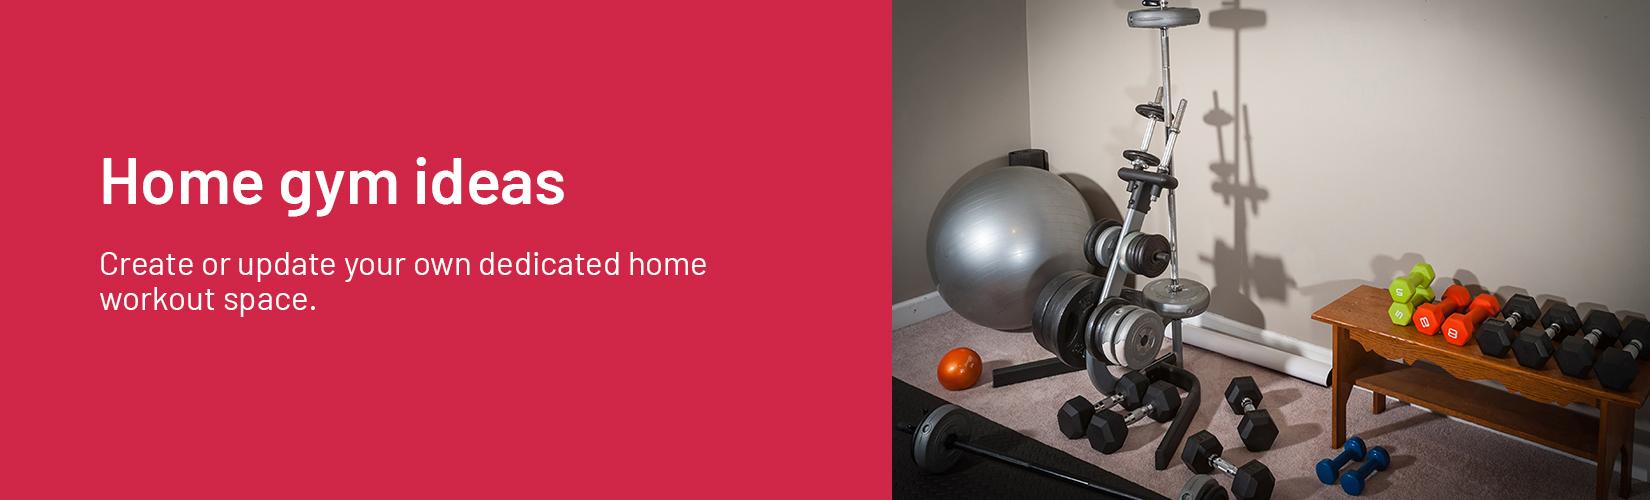 Home gym ideas. Create or update your own dedicated home workout space.